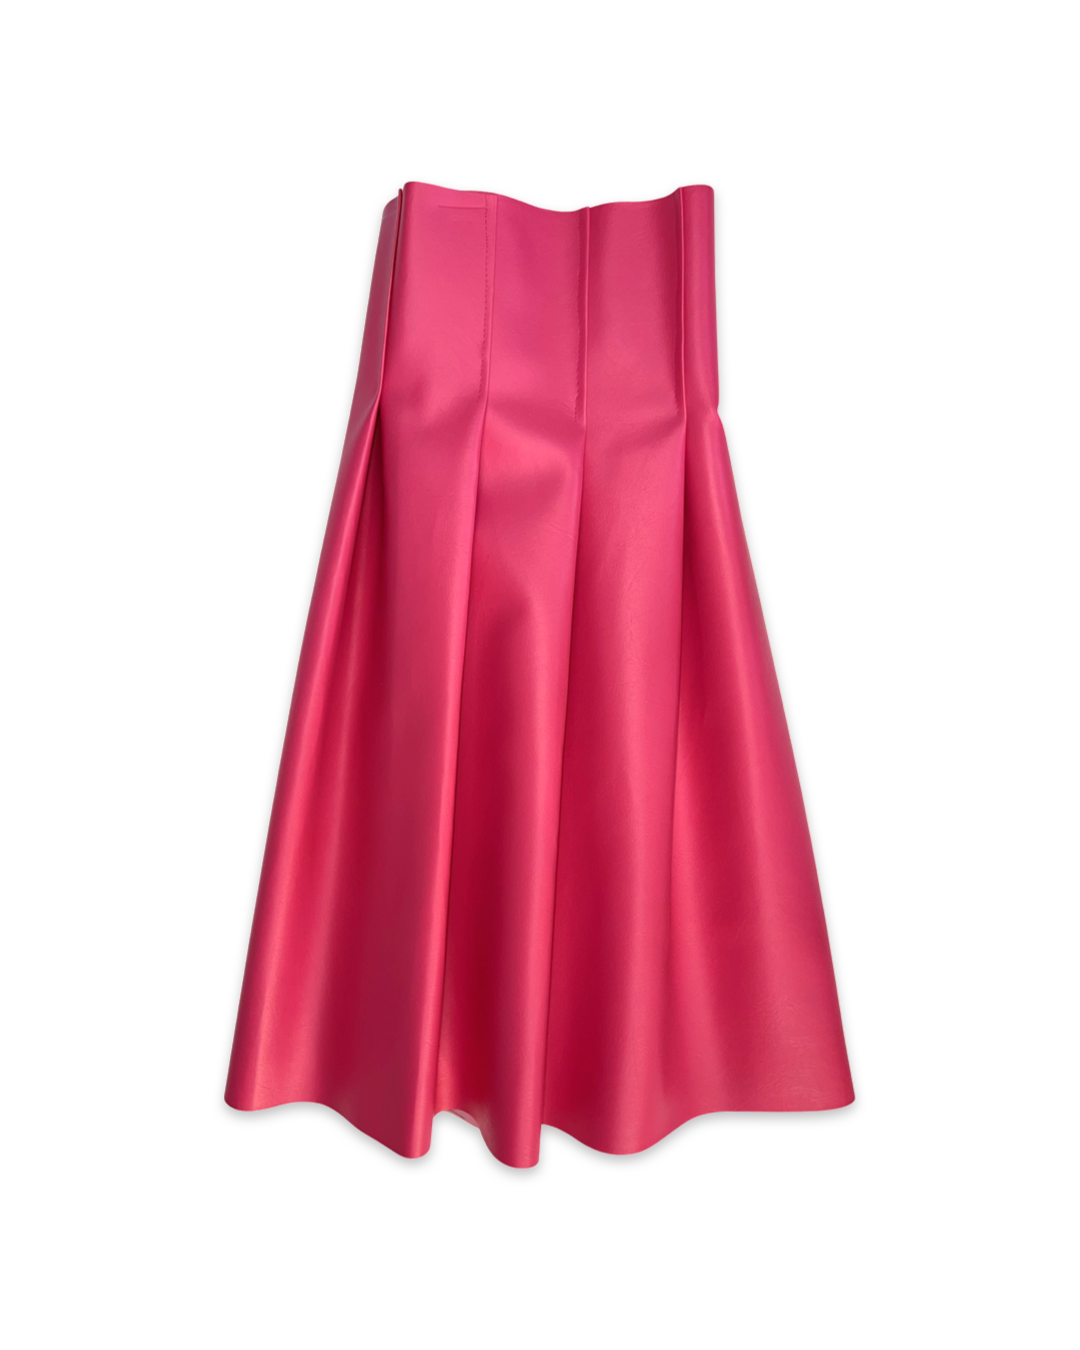 Uniform Pleated Skirt in Pink